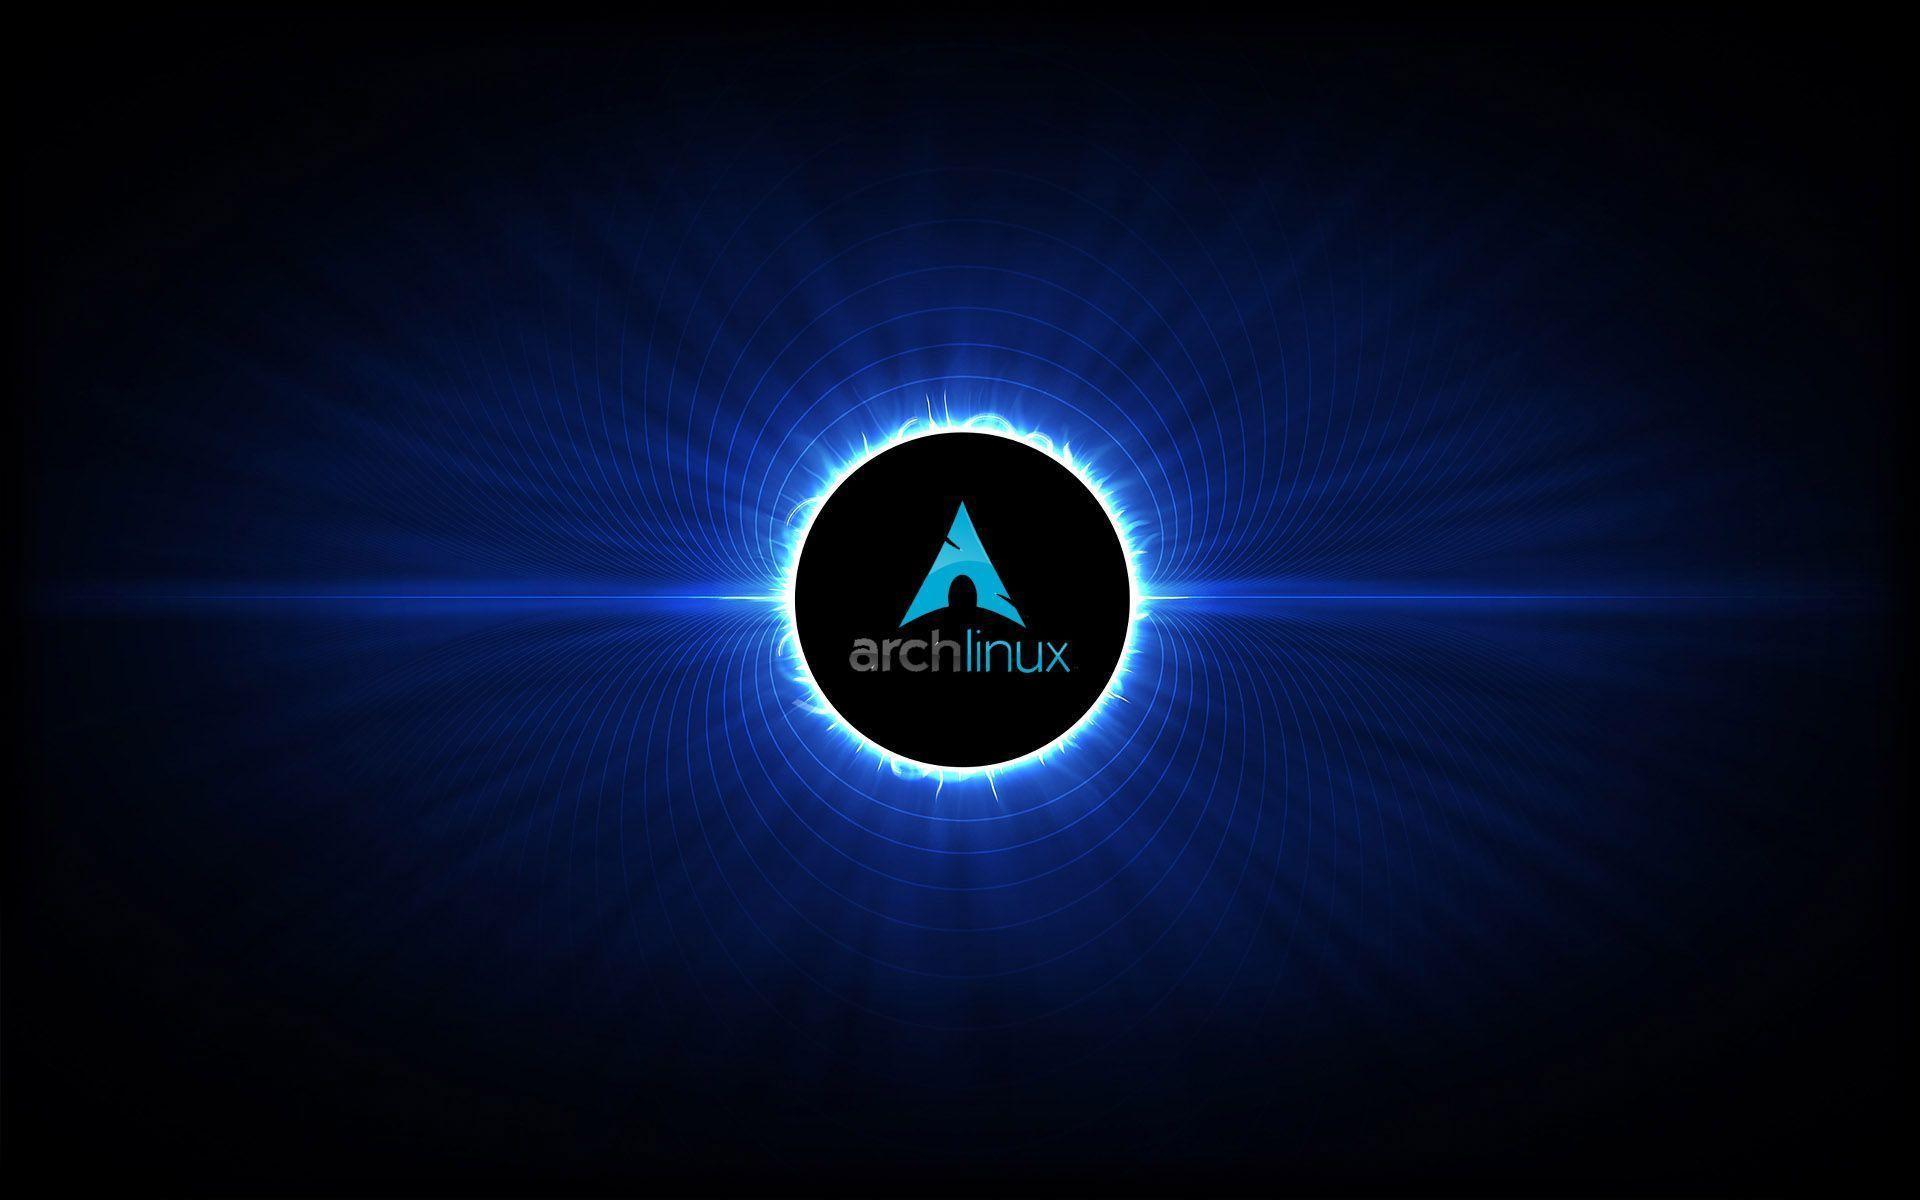 Arch Linux wallpaper